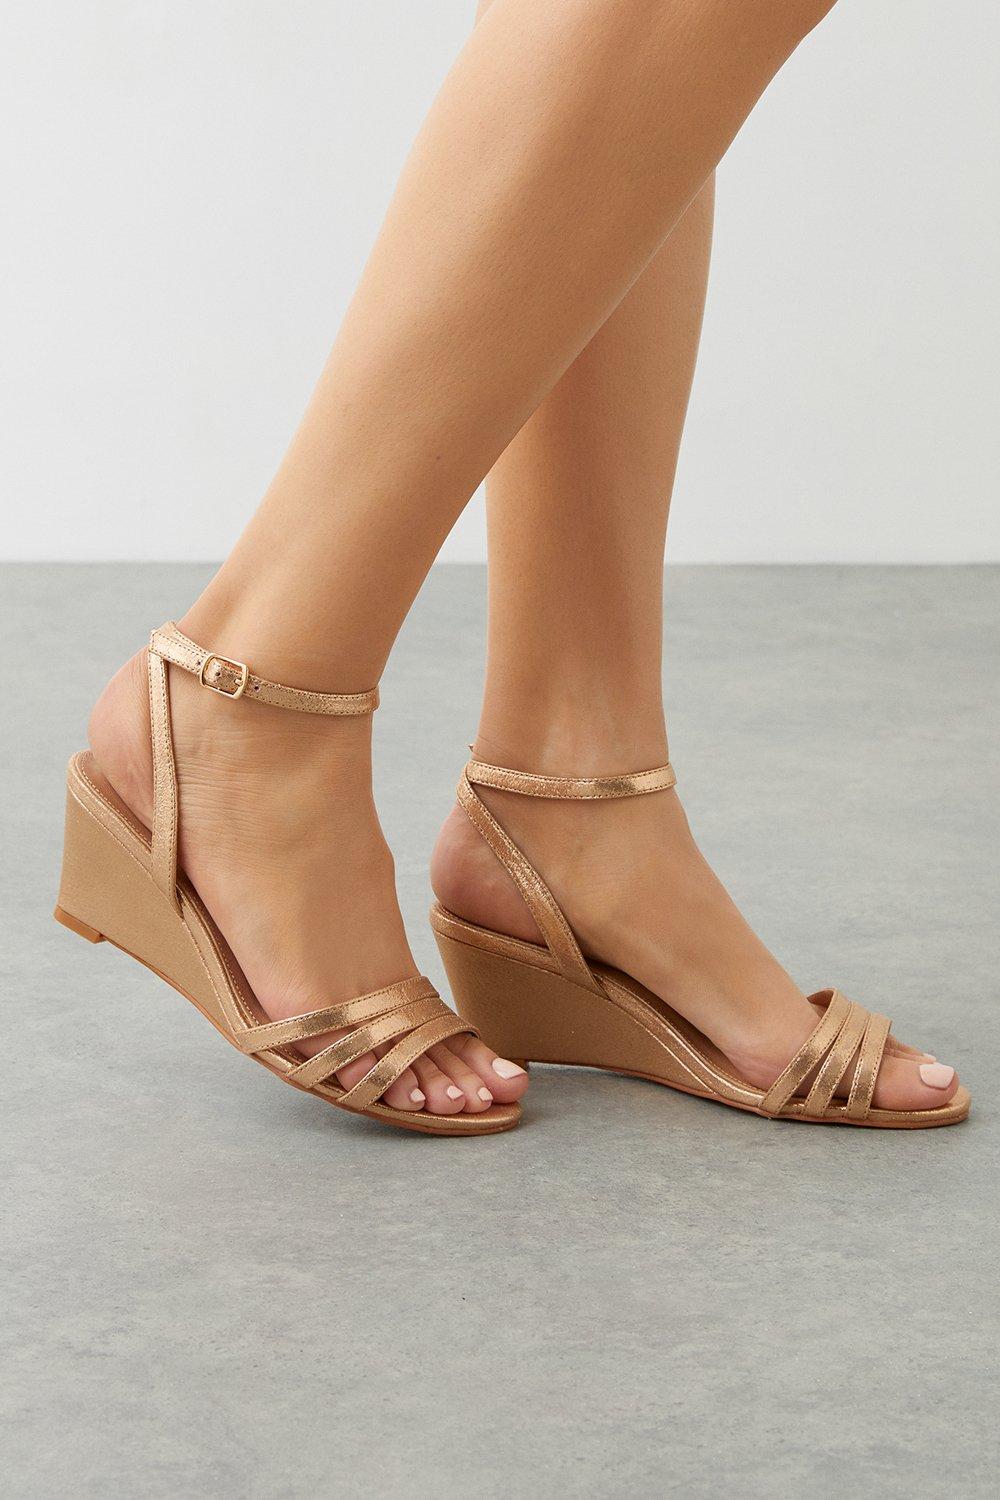 Women’s Good For The Sole: Wide Fit Angelina Wedge Heel Sandals - rose gold - 7